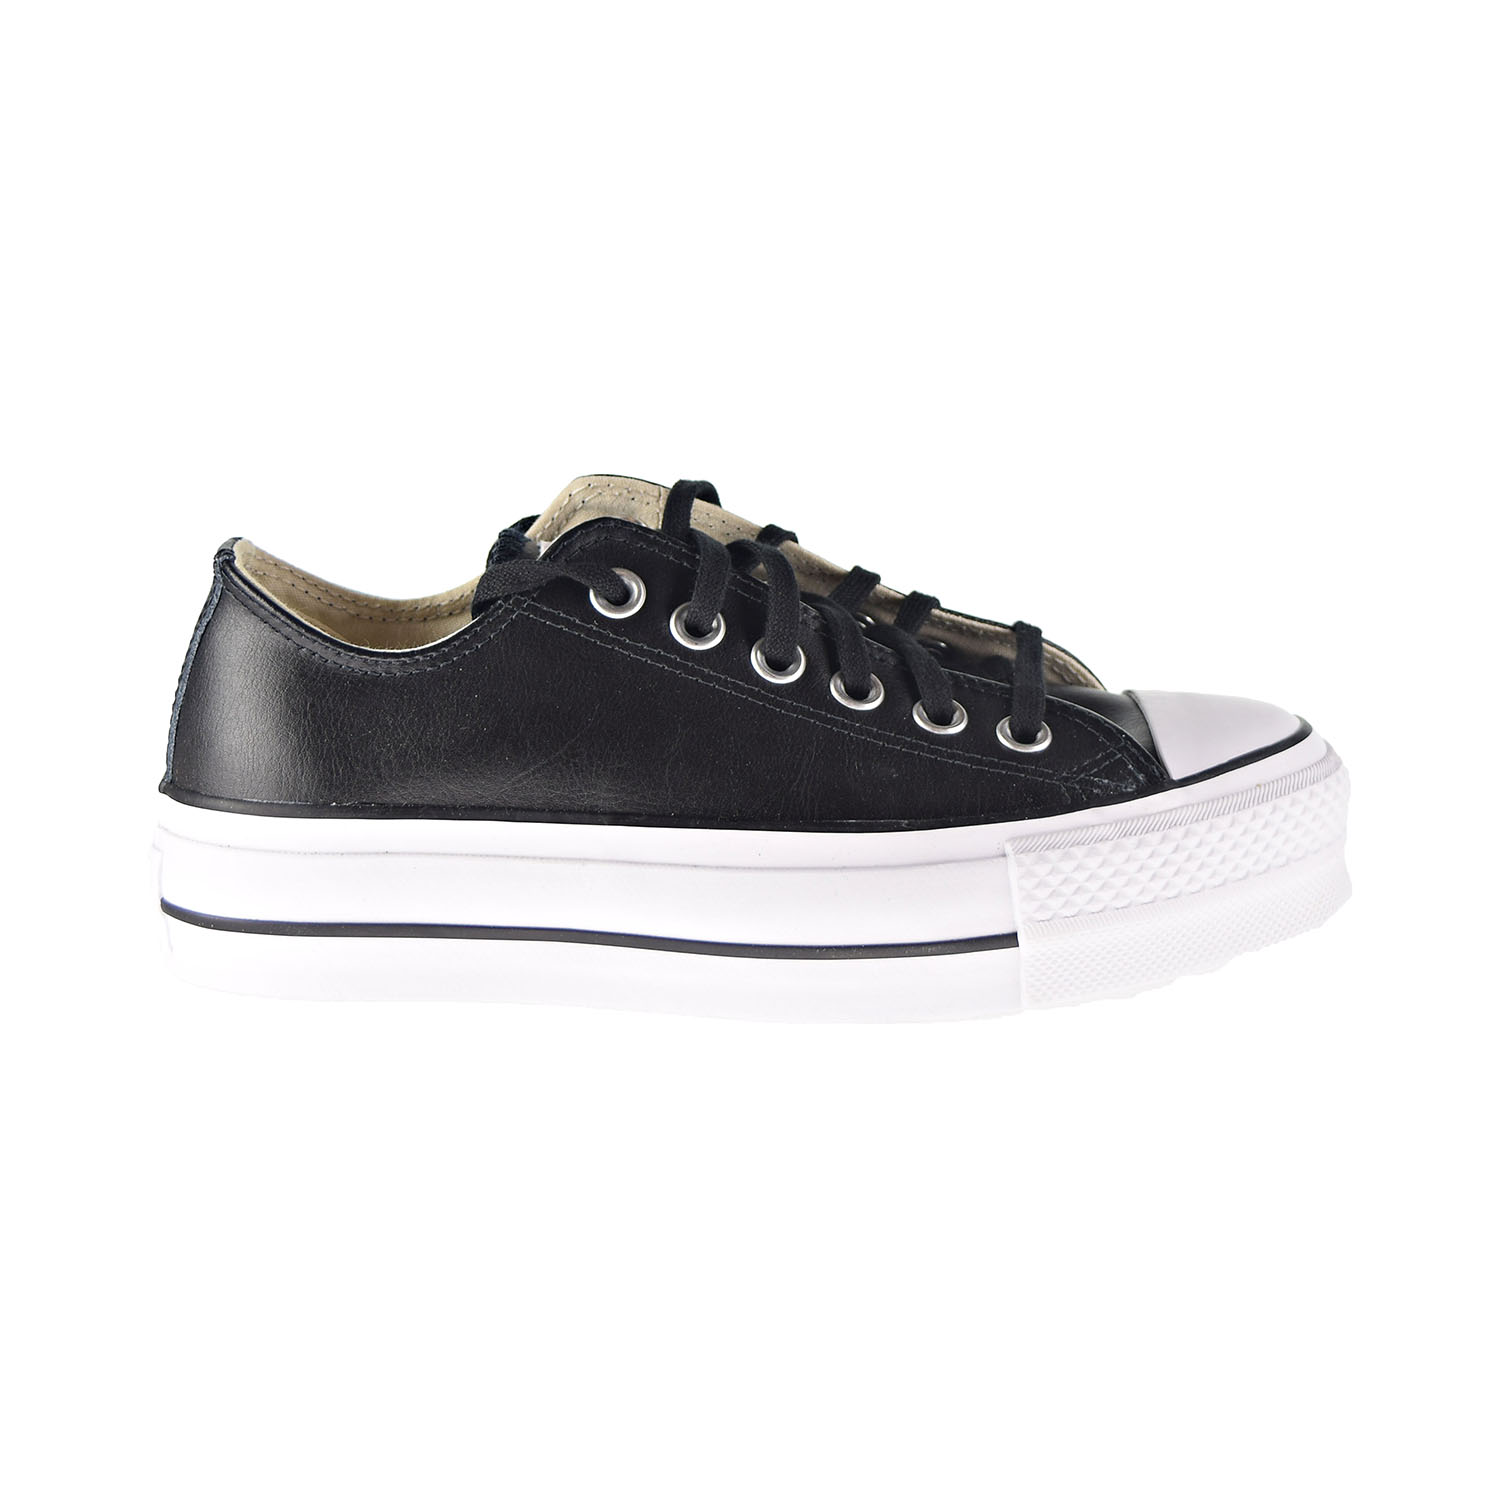 Converse Chuck Taylor All Star Platform Leather Low Top Women's Shoes ...